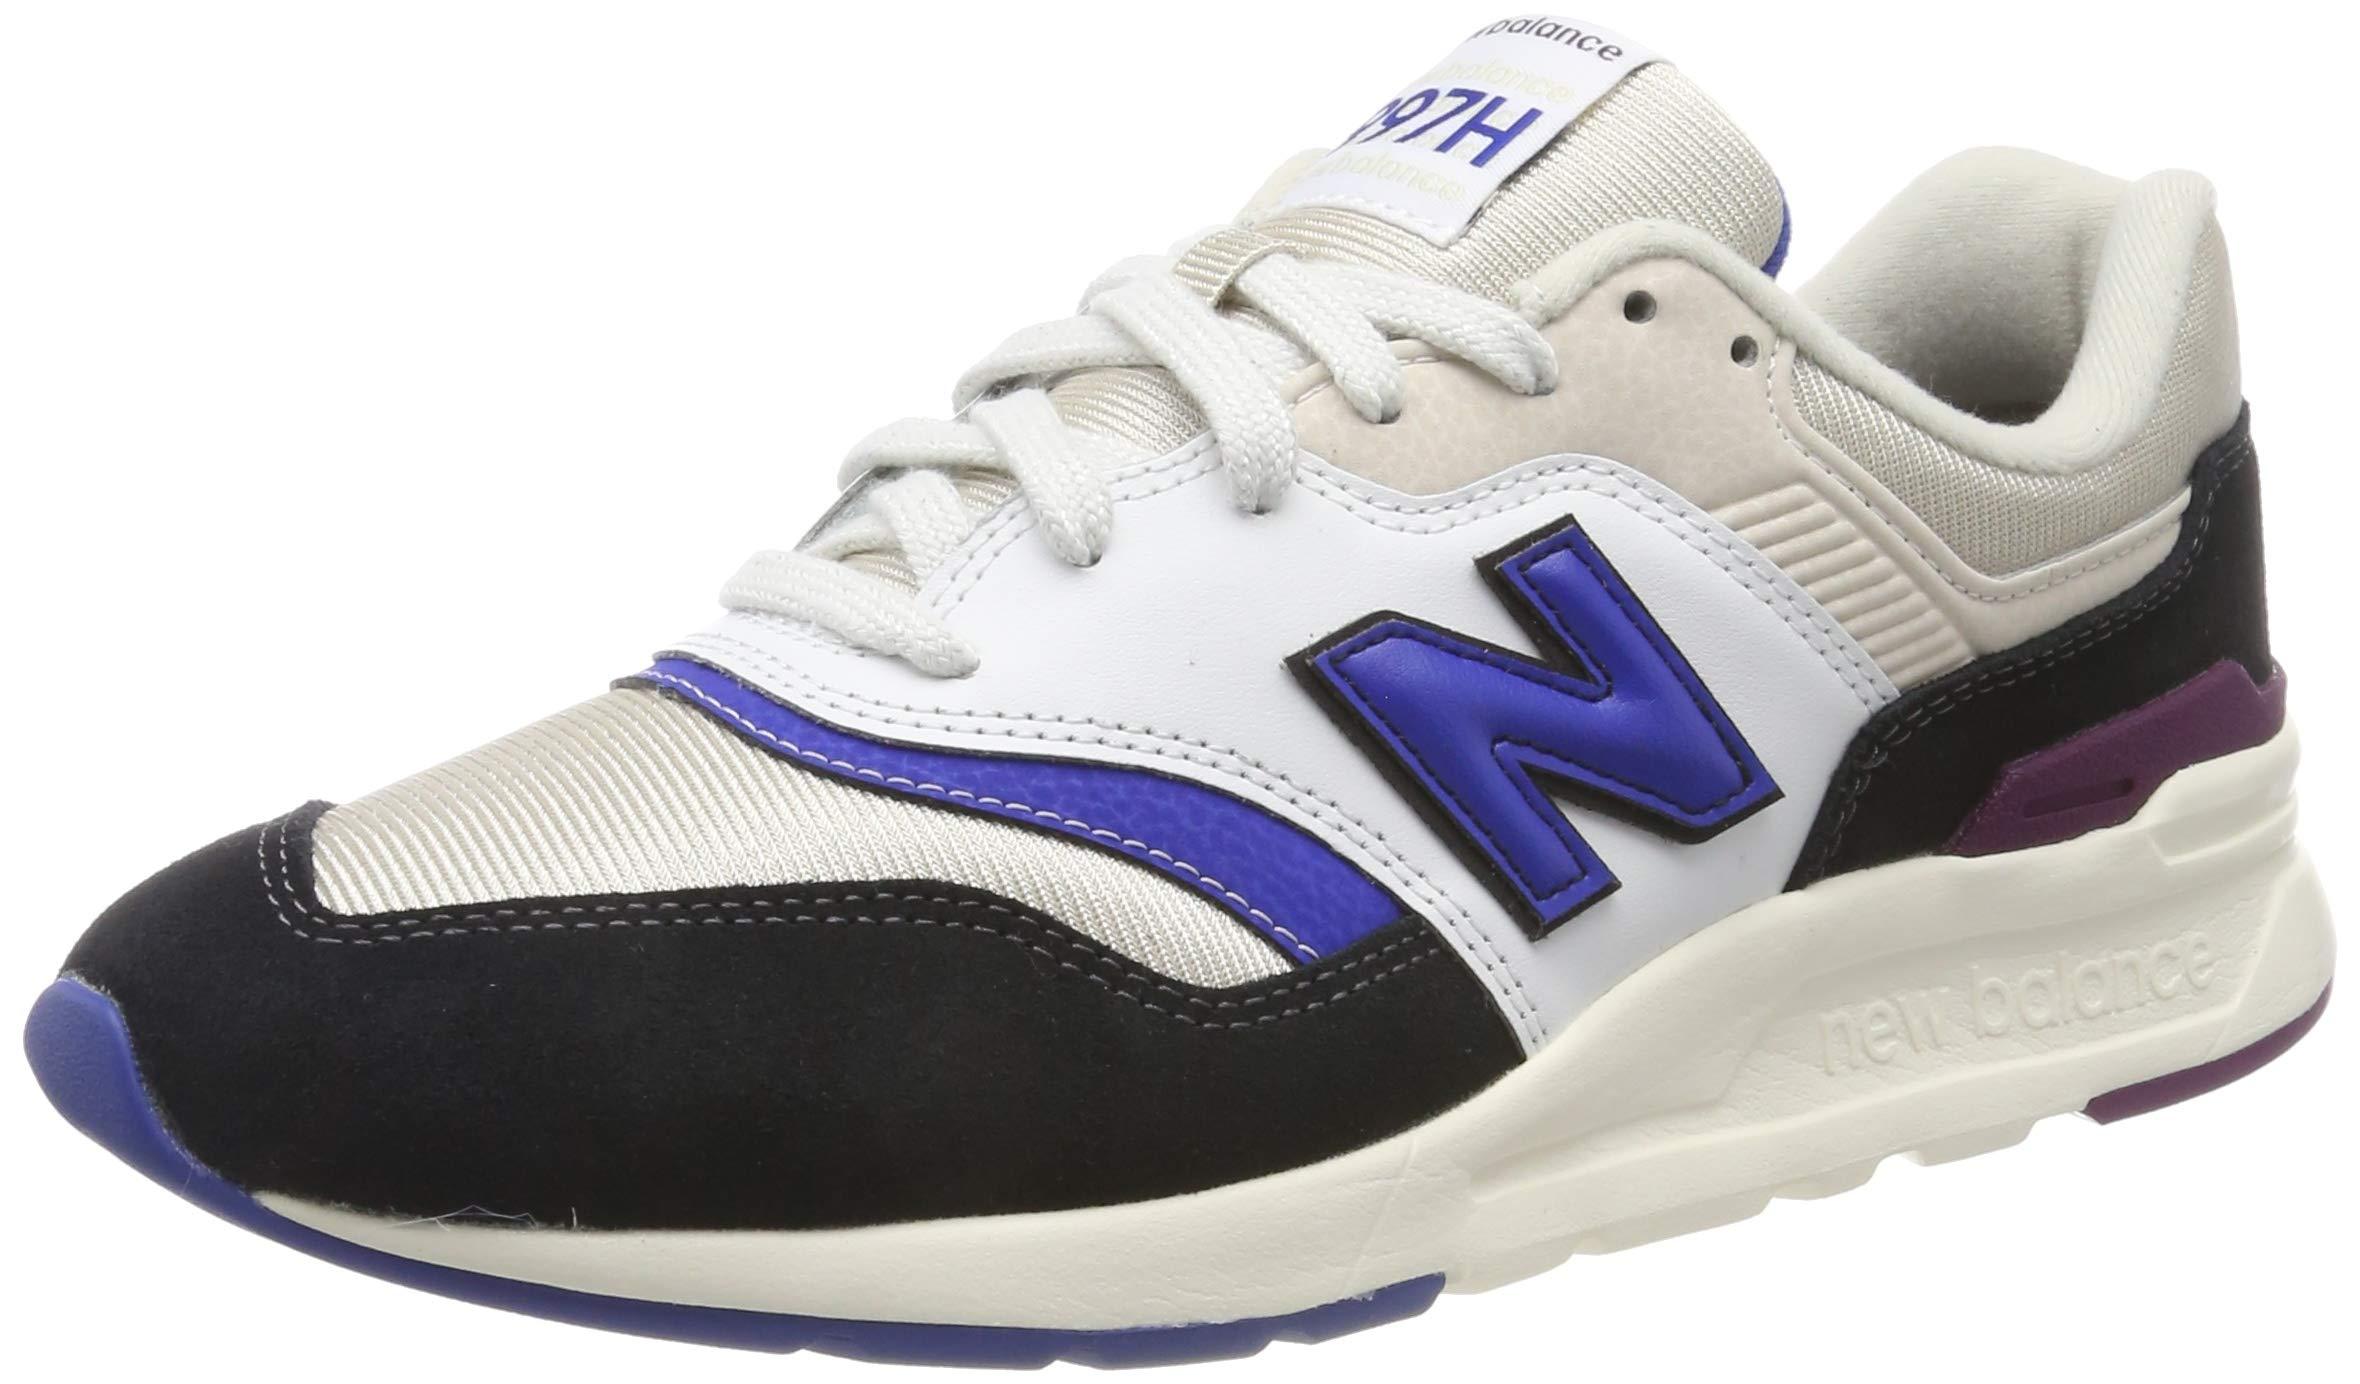 New Balance Rubber 997h V1 Trainers in Oyster/Oyster (White) for Men - Save  37% - Lyst